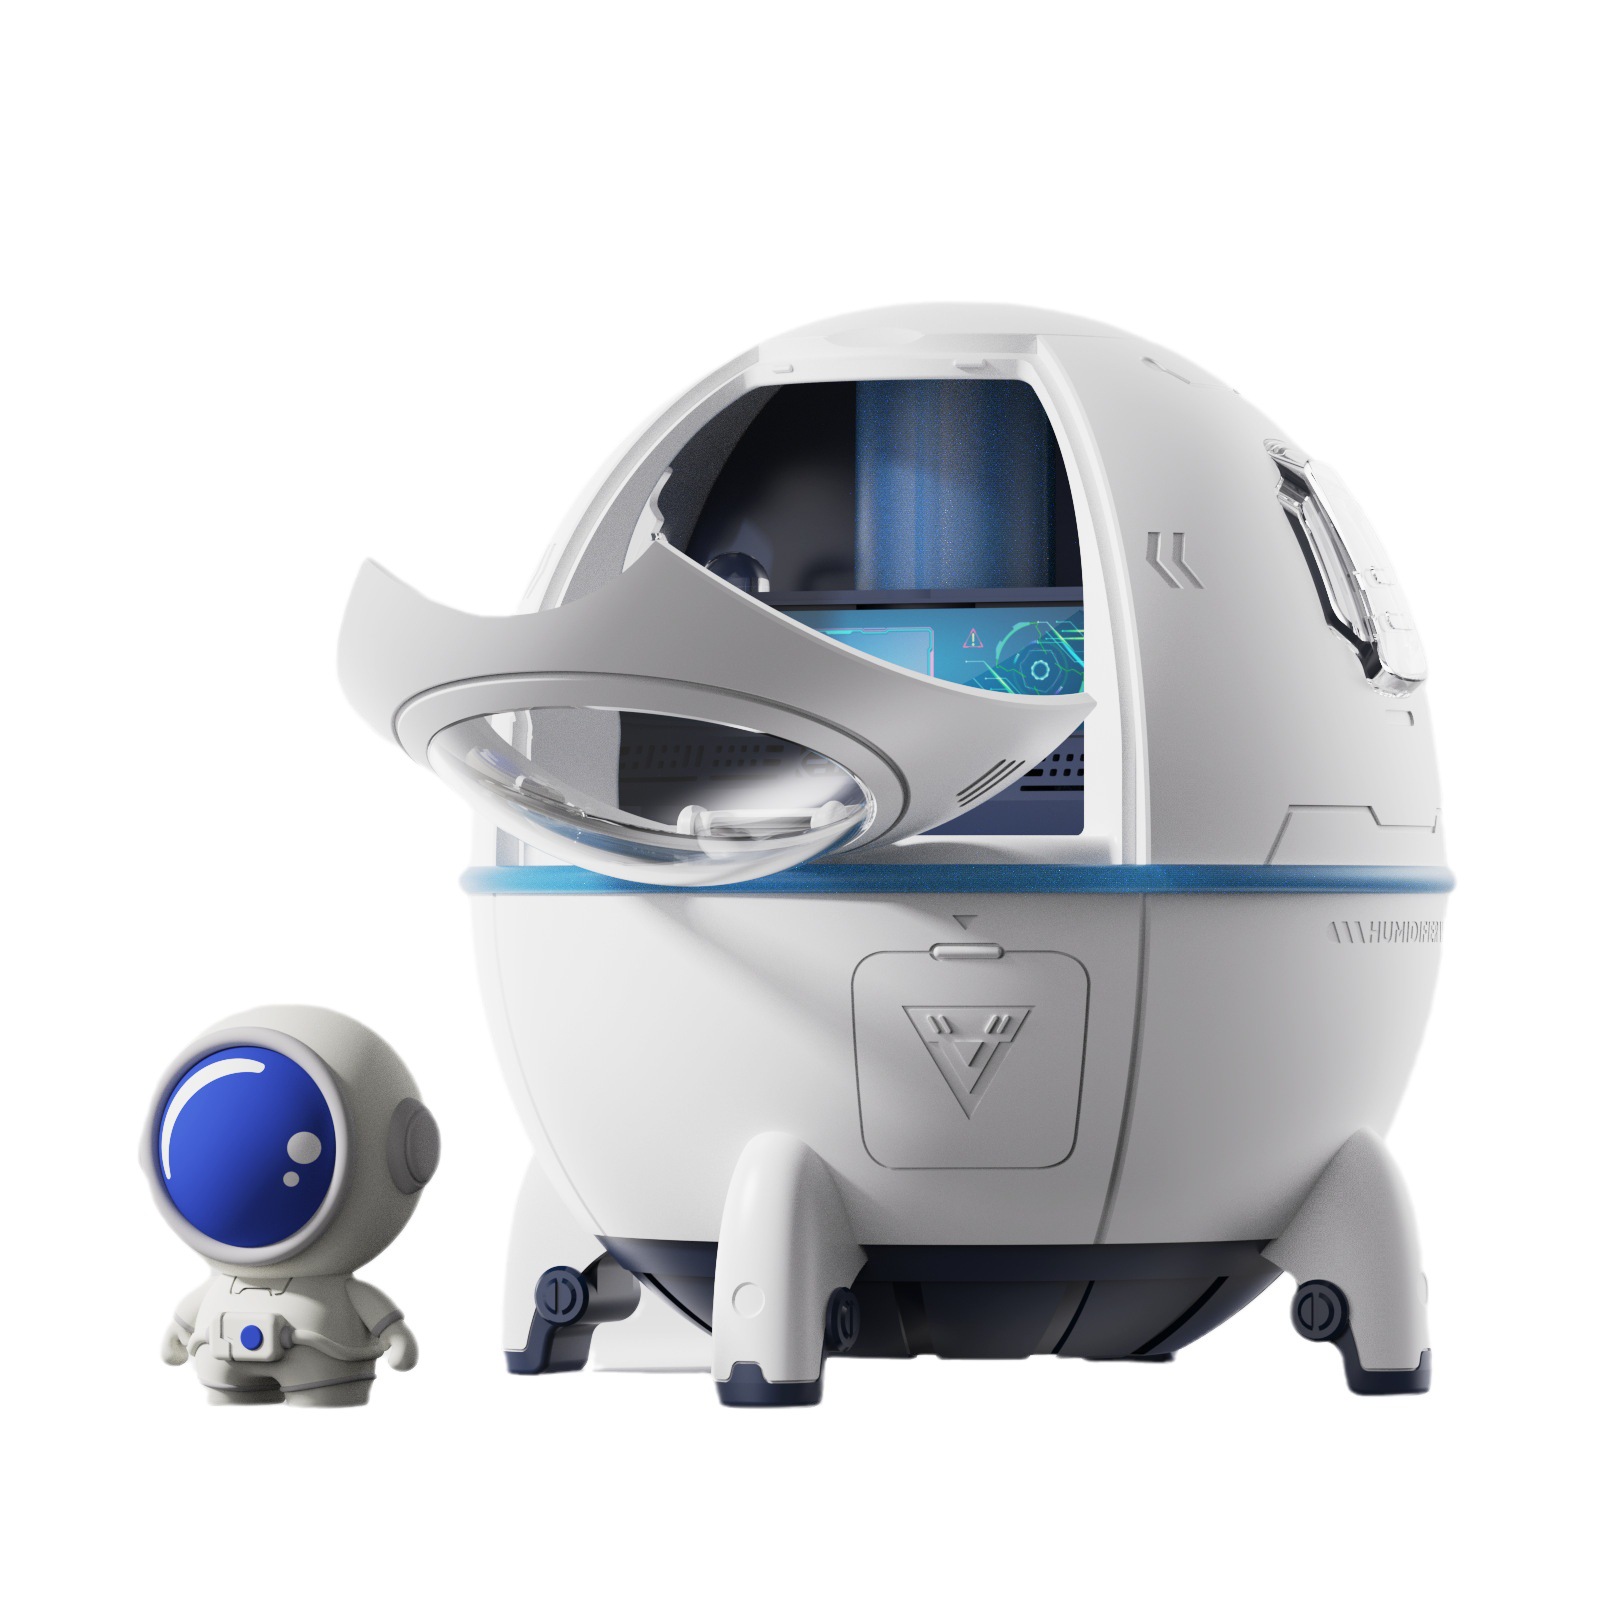 New Creative Space Capsule Mini Household Heavy Fog Air Bedroom Office Desk Surface Panel Small Portable Humidifier